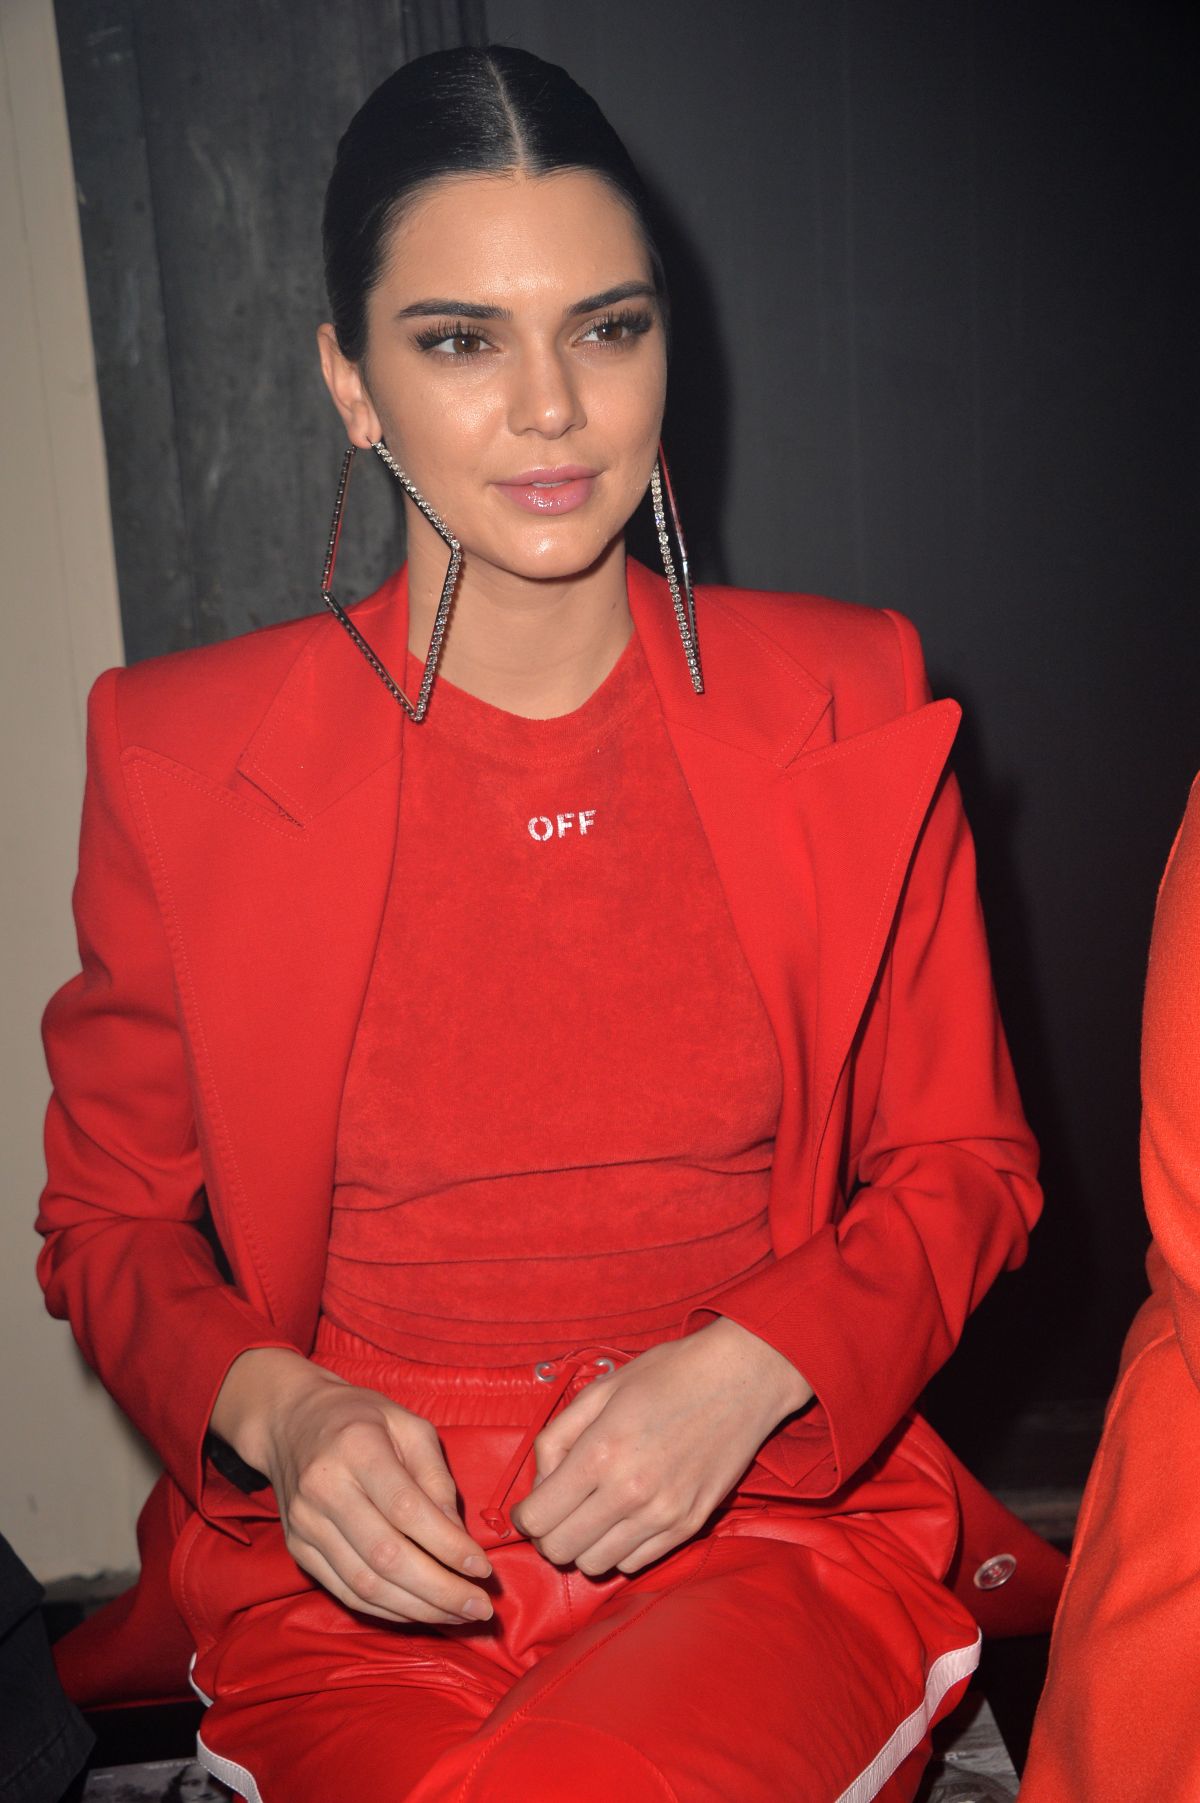 KENDALL JENNER at Off-white Fashion Show at Paris Fashion Week 03/02/2017 - HawtCelebs1200 x 1803